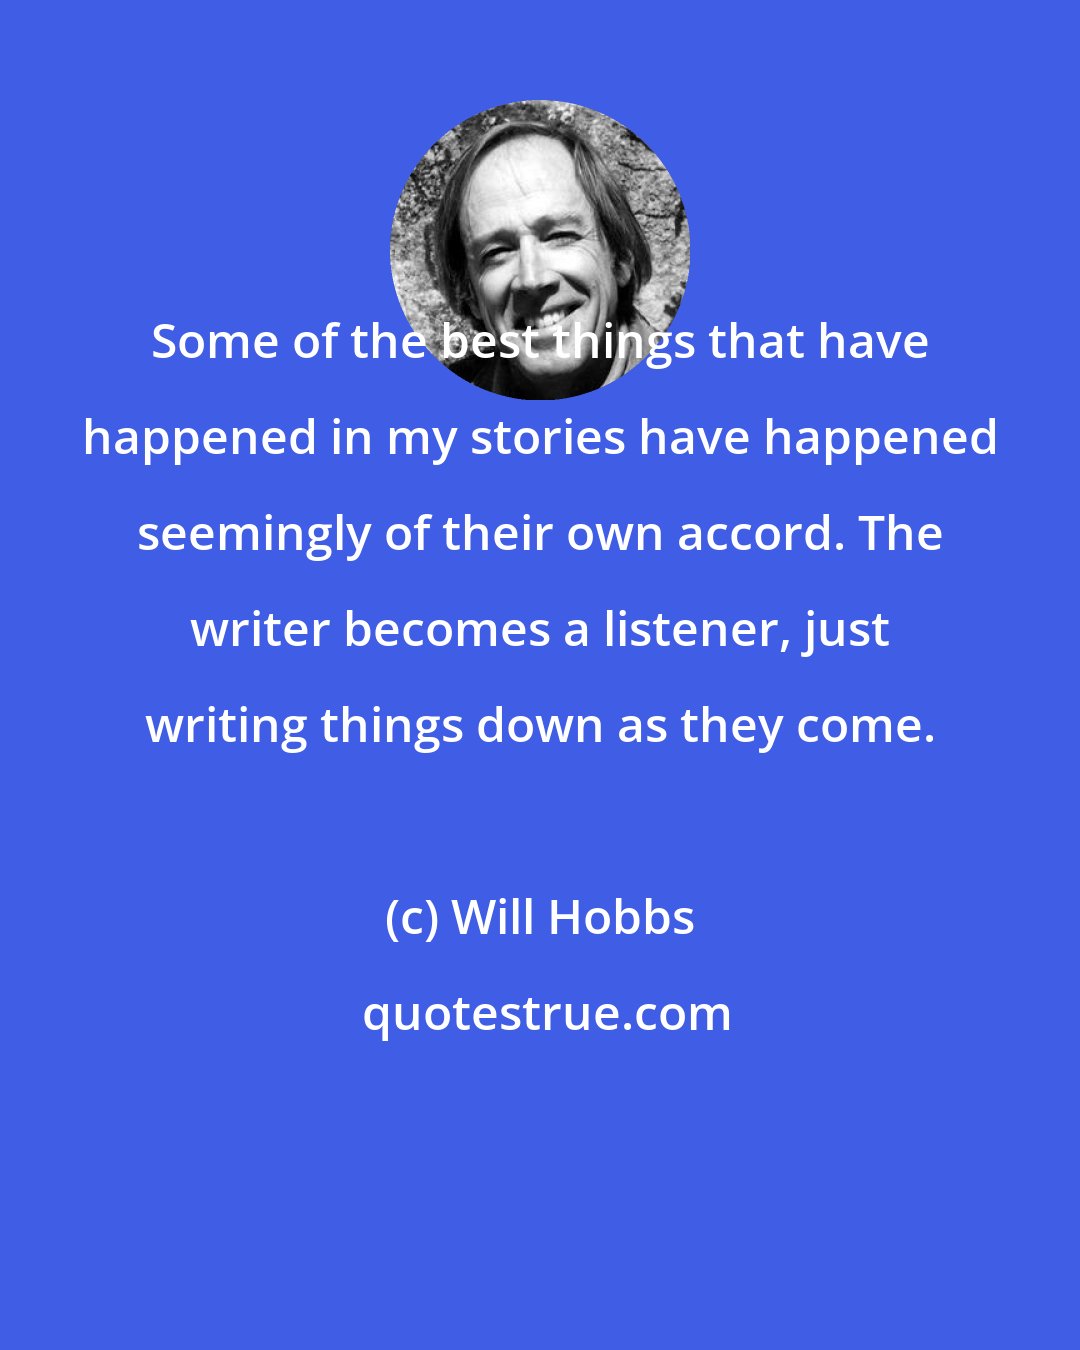 Will Hobbs: Some of the best things that have happened in my stories have happened seemingly of their own accord. The writer becomes a listener, just writing things down as they come.